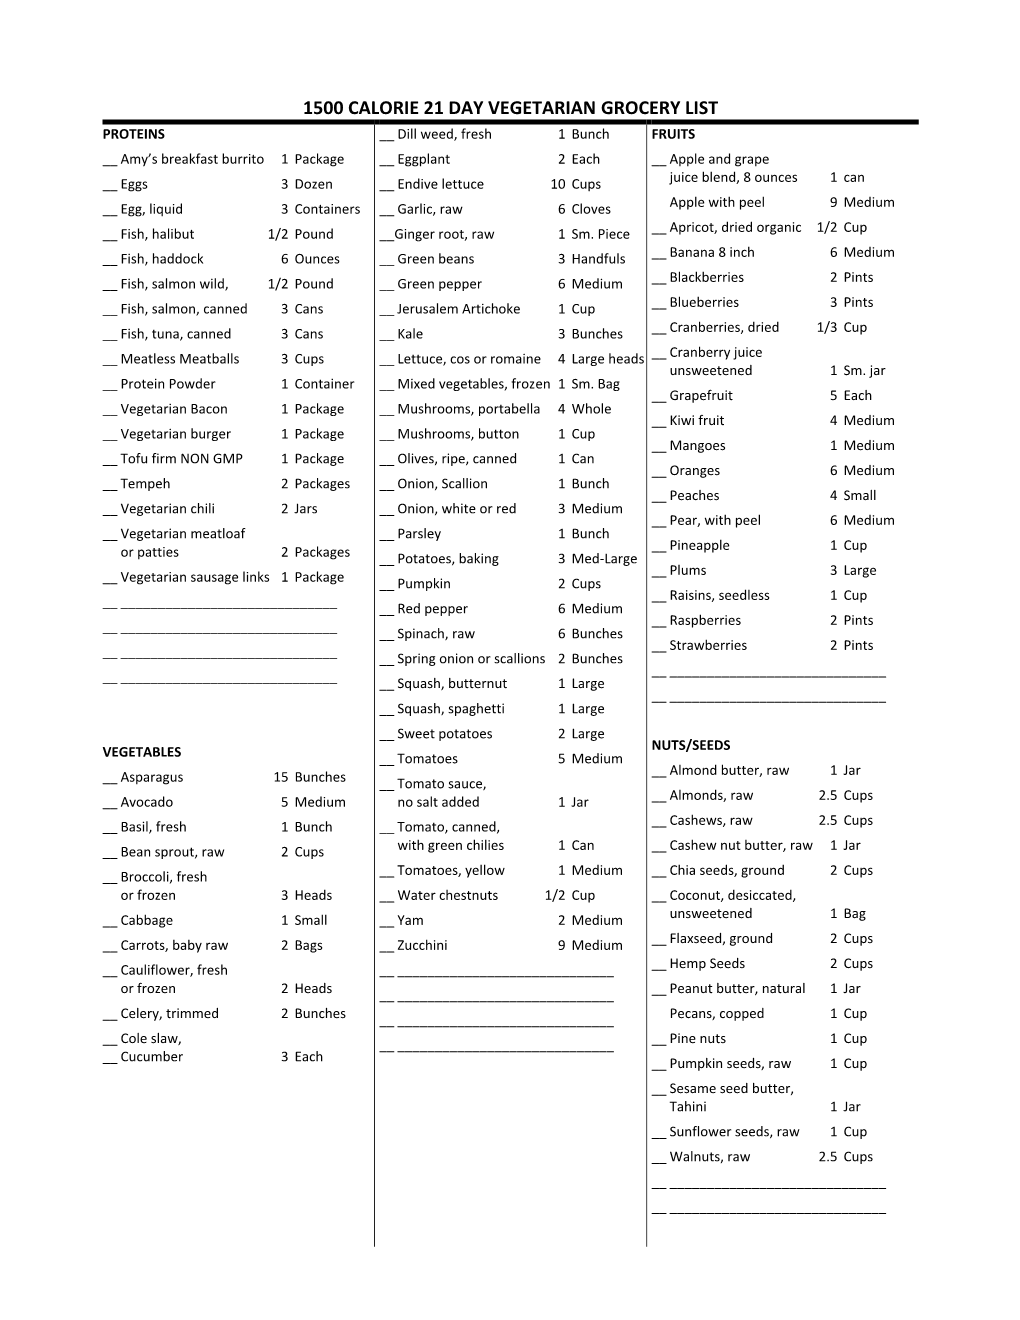 1500 Calorie 21 Day Vegetarian Grocery List